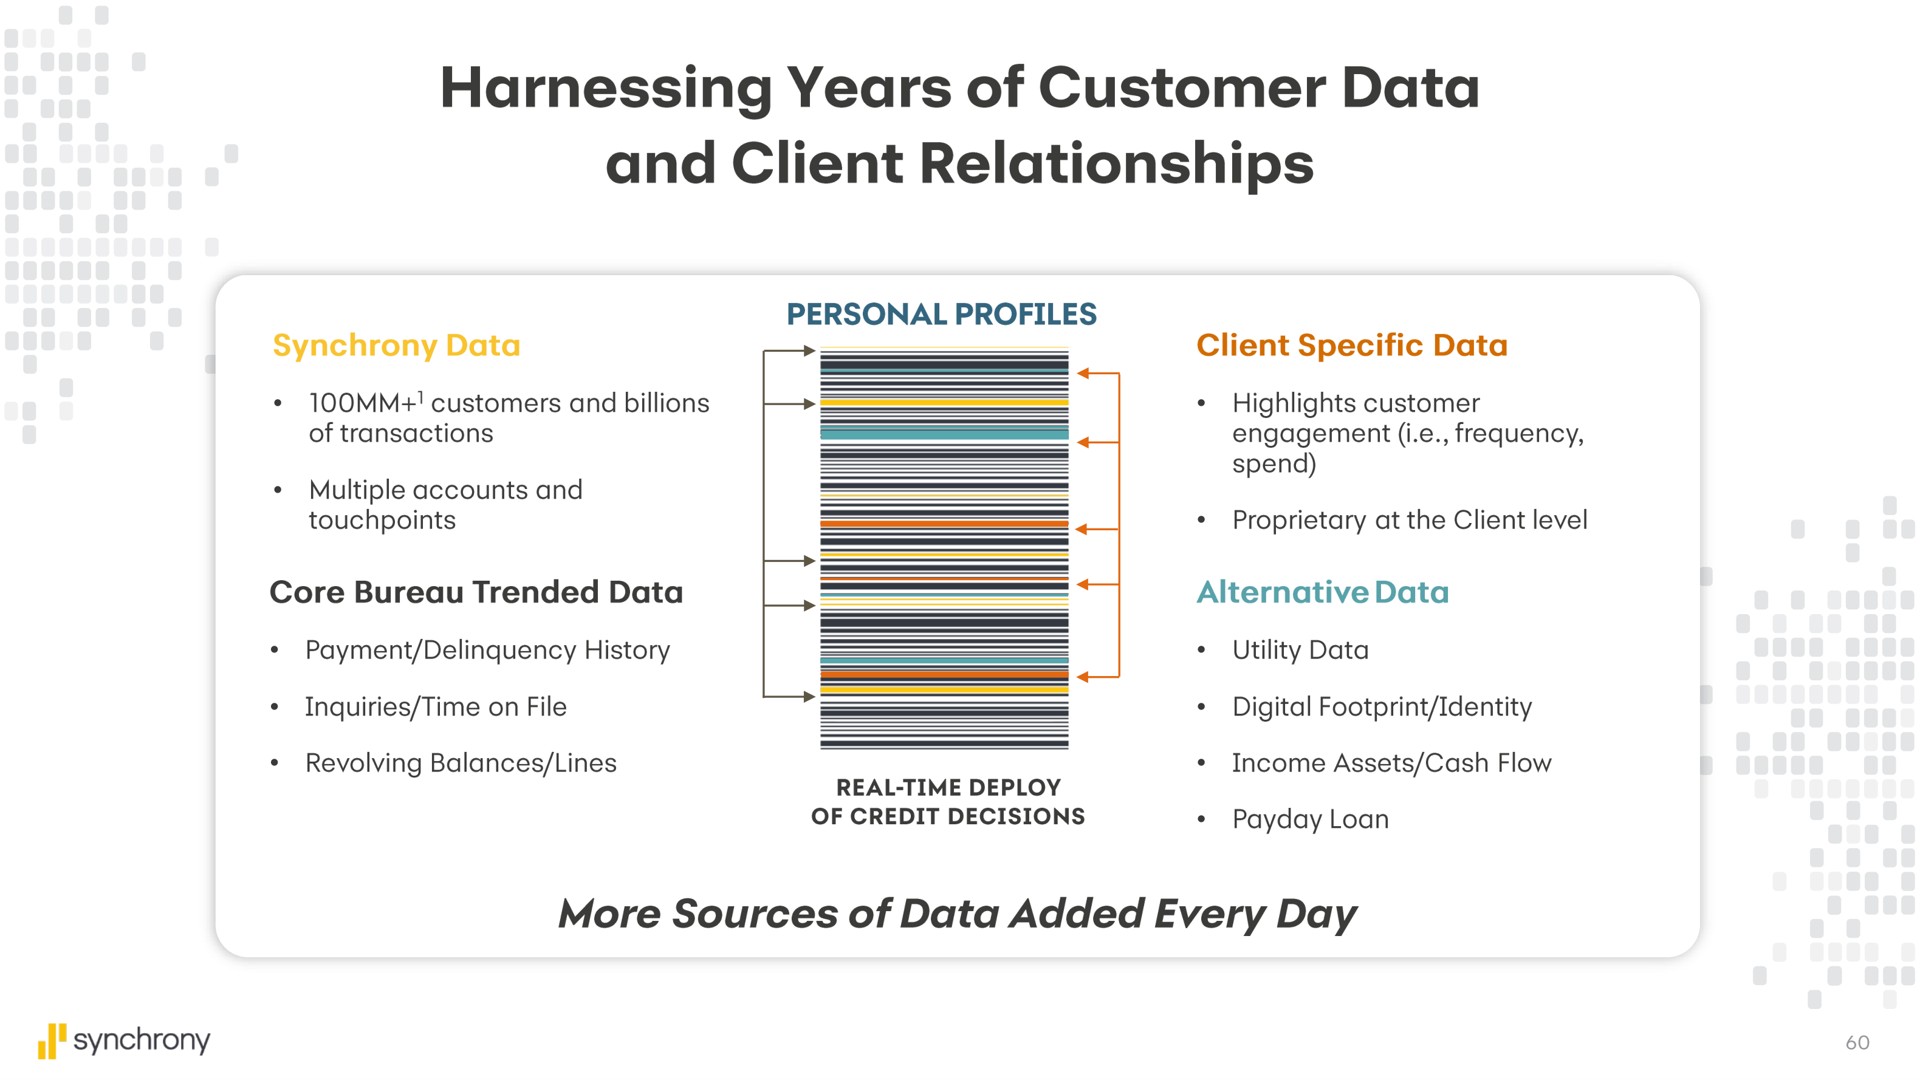 harnessing years of customer data and client relationships | Synchrony Financial